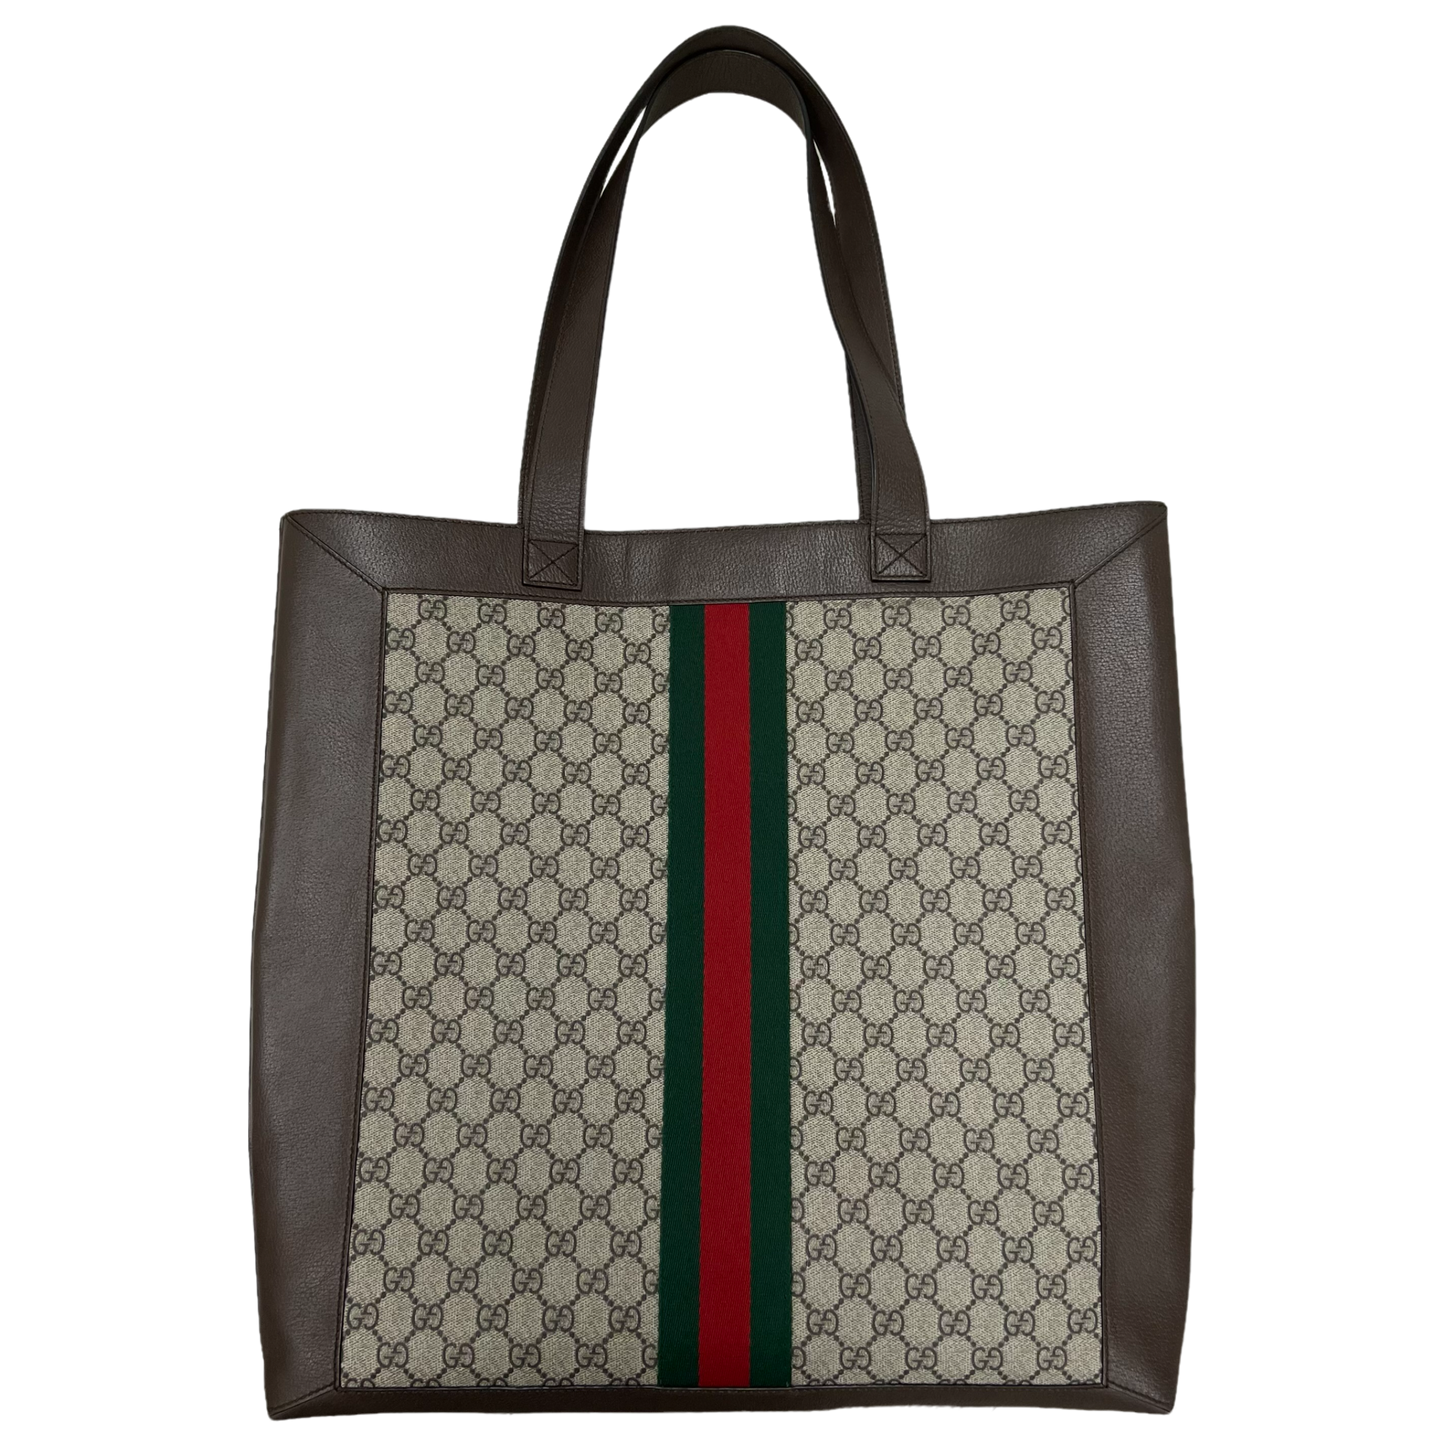 Gucci Ophidia Soft GG Supreme Large Tote Bag with Pouch